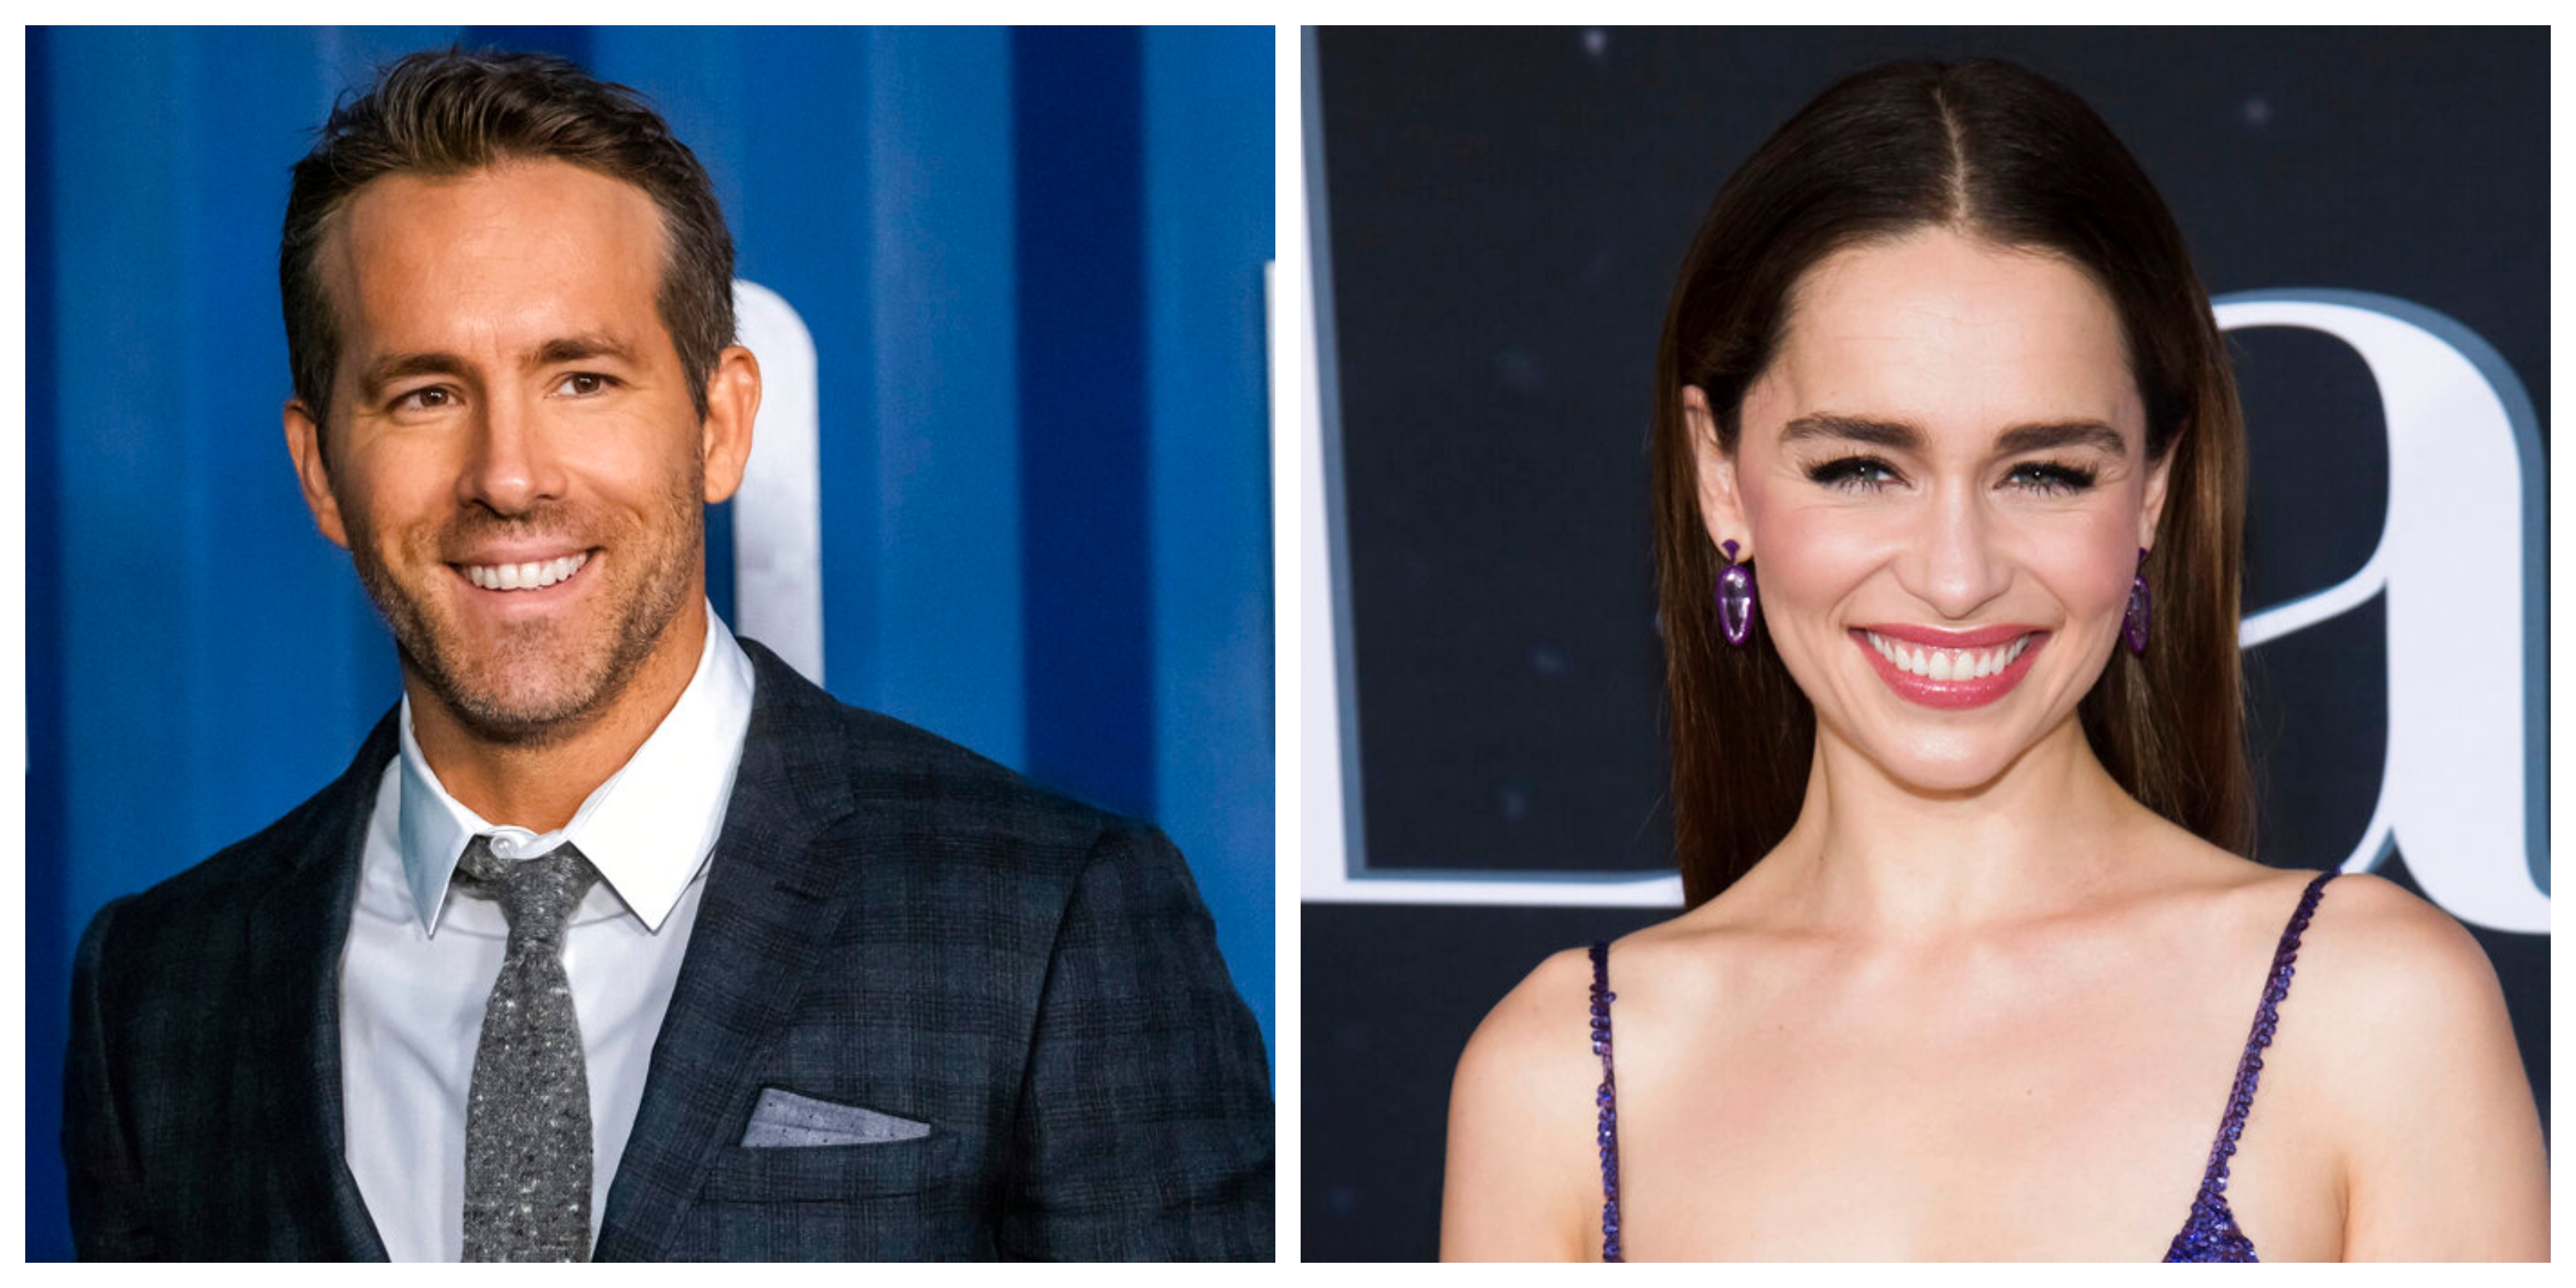 Today's famous birthdays list for October 23, 2020 includes celebrities Ryan Reynolds, Emilia Clarke - cleveland.com